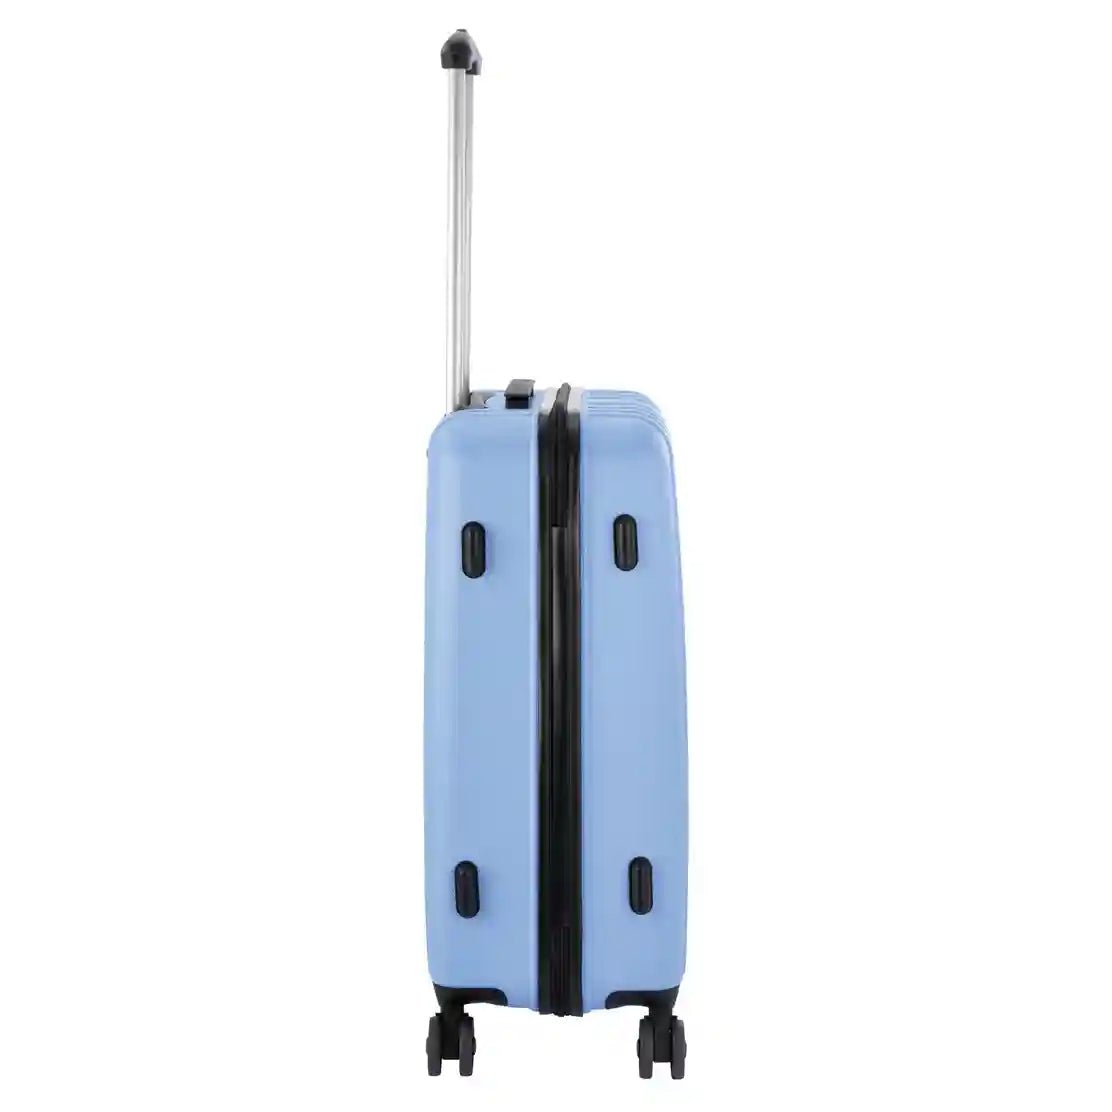 Paradise by Check In Aurora 4-Rollen Trolley 76 cm - Koralle